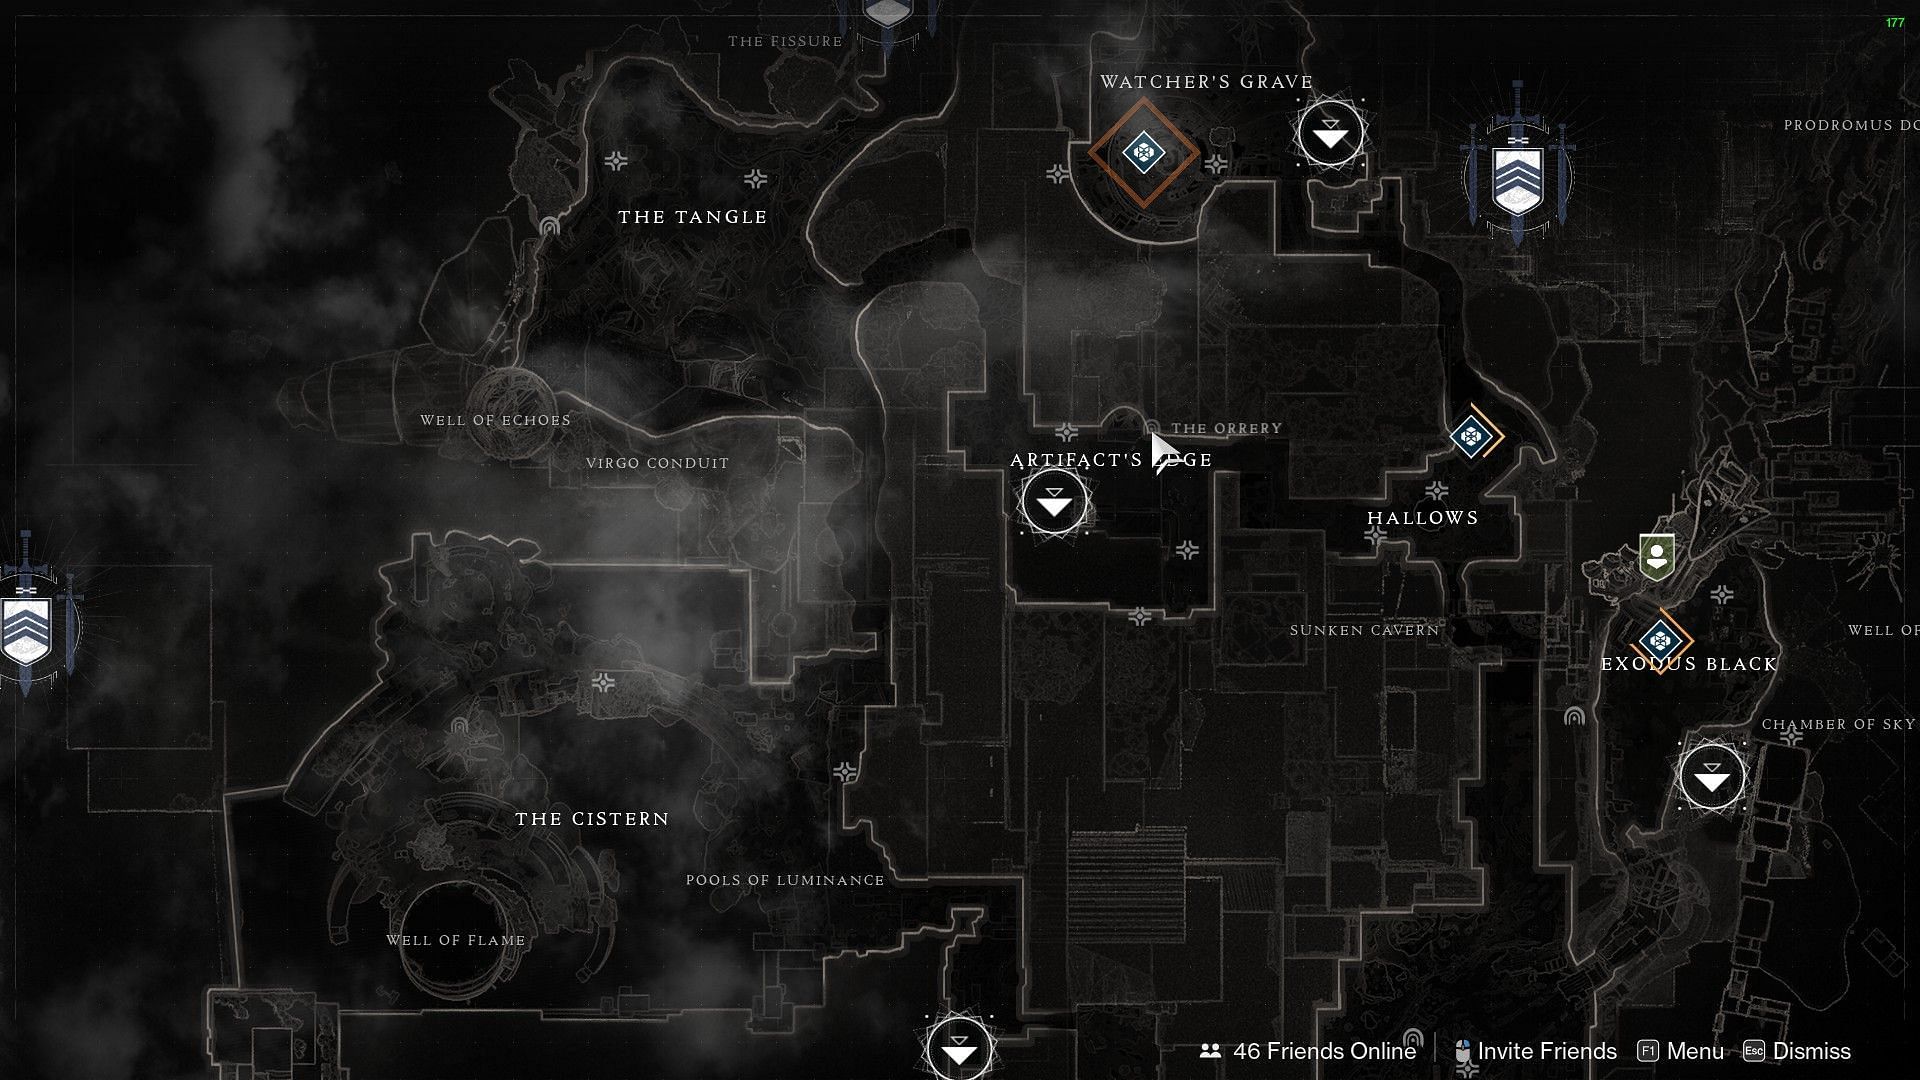 The Orrery Lost Sector (Image via Destiny 2)